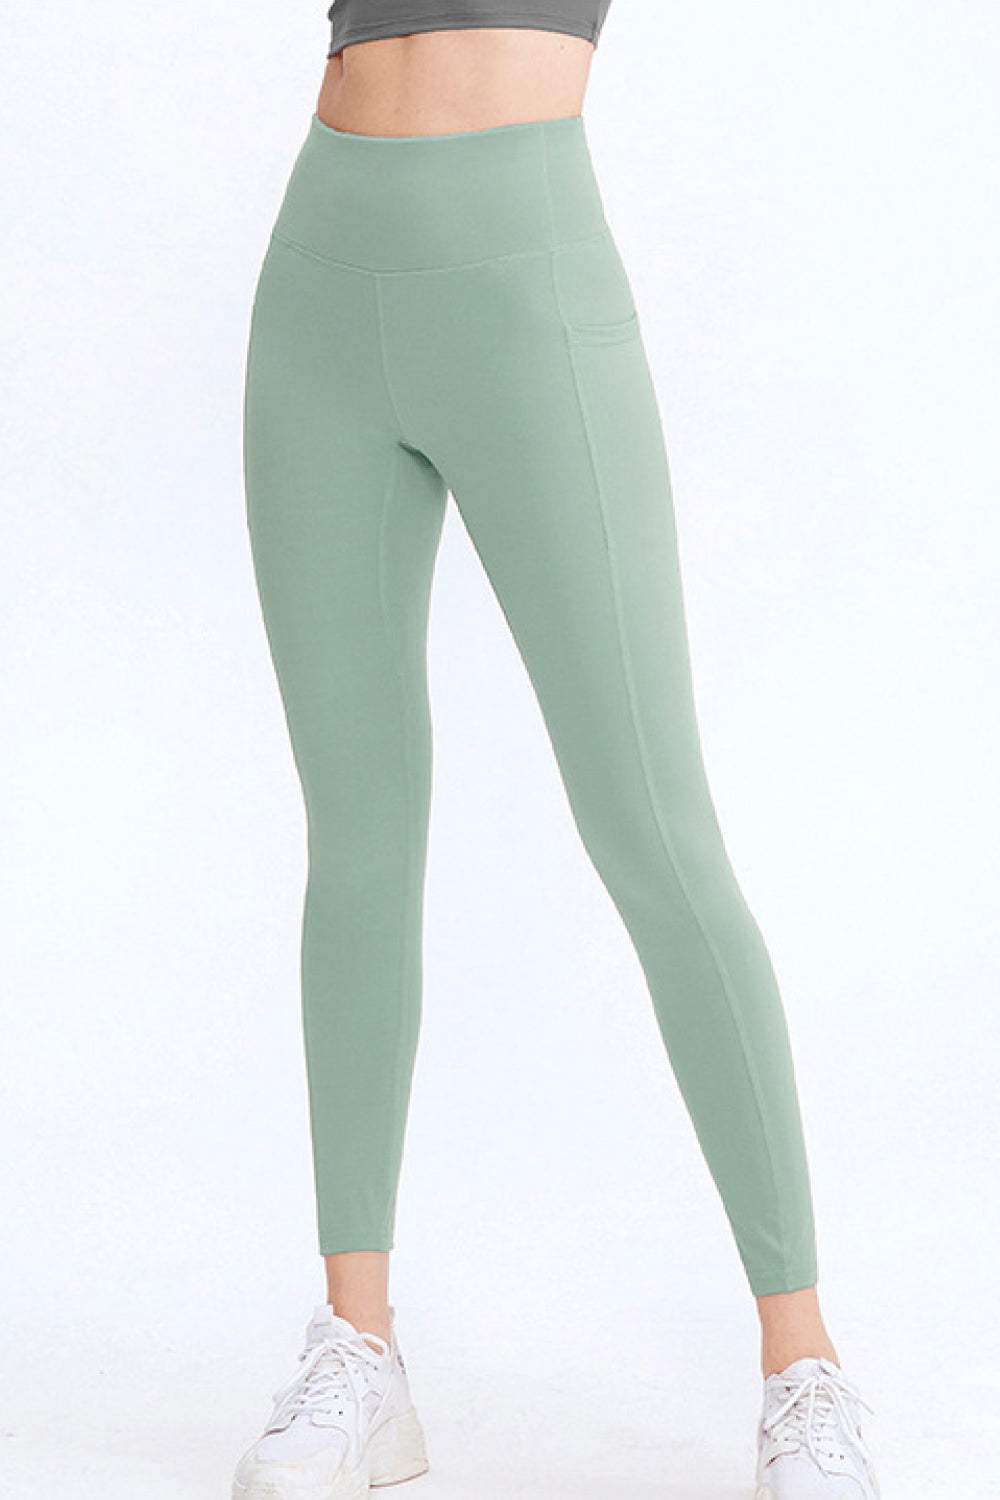 High Waist Ankle-Length Sports Leggings with Pockets